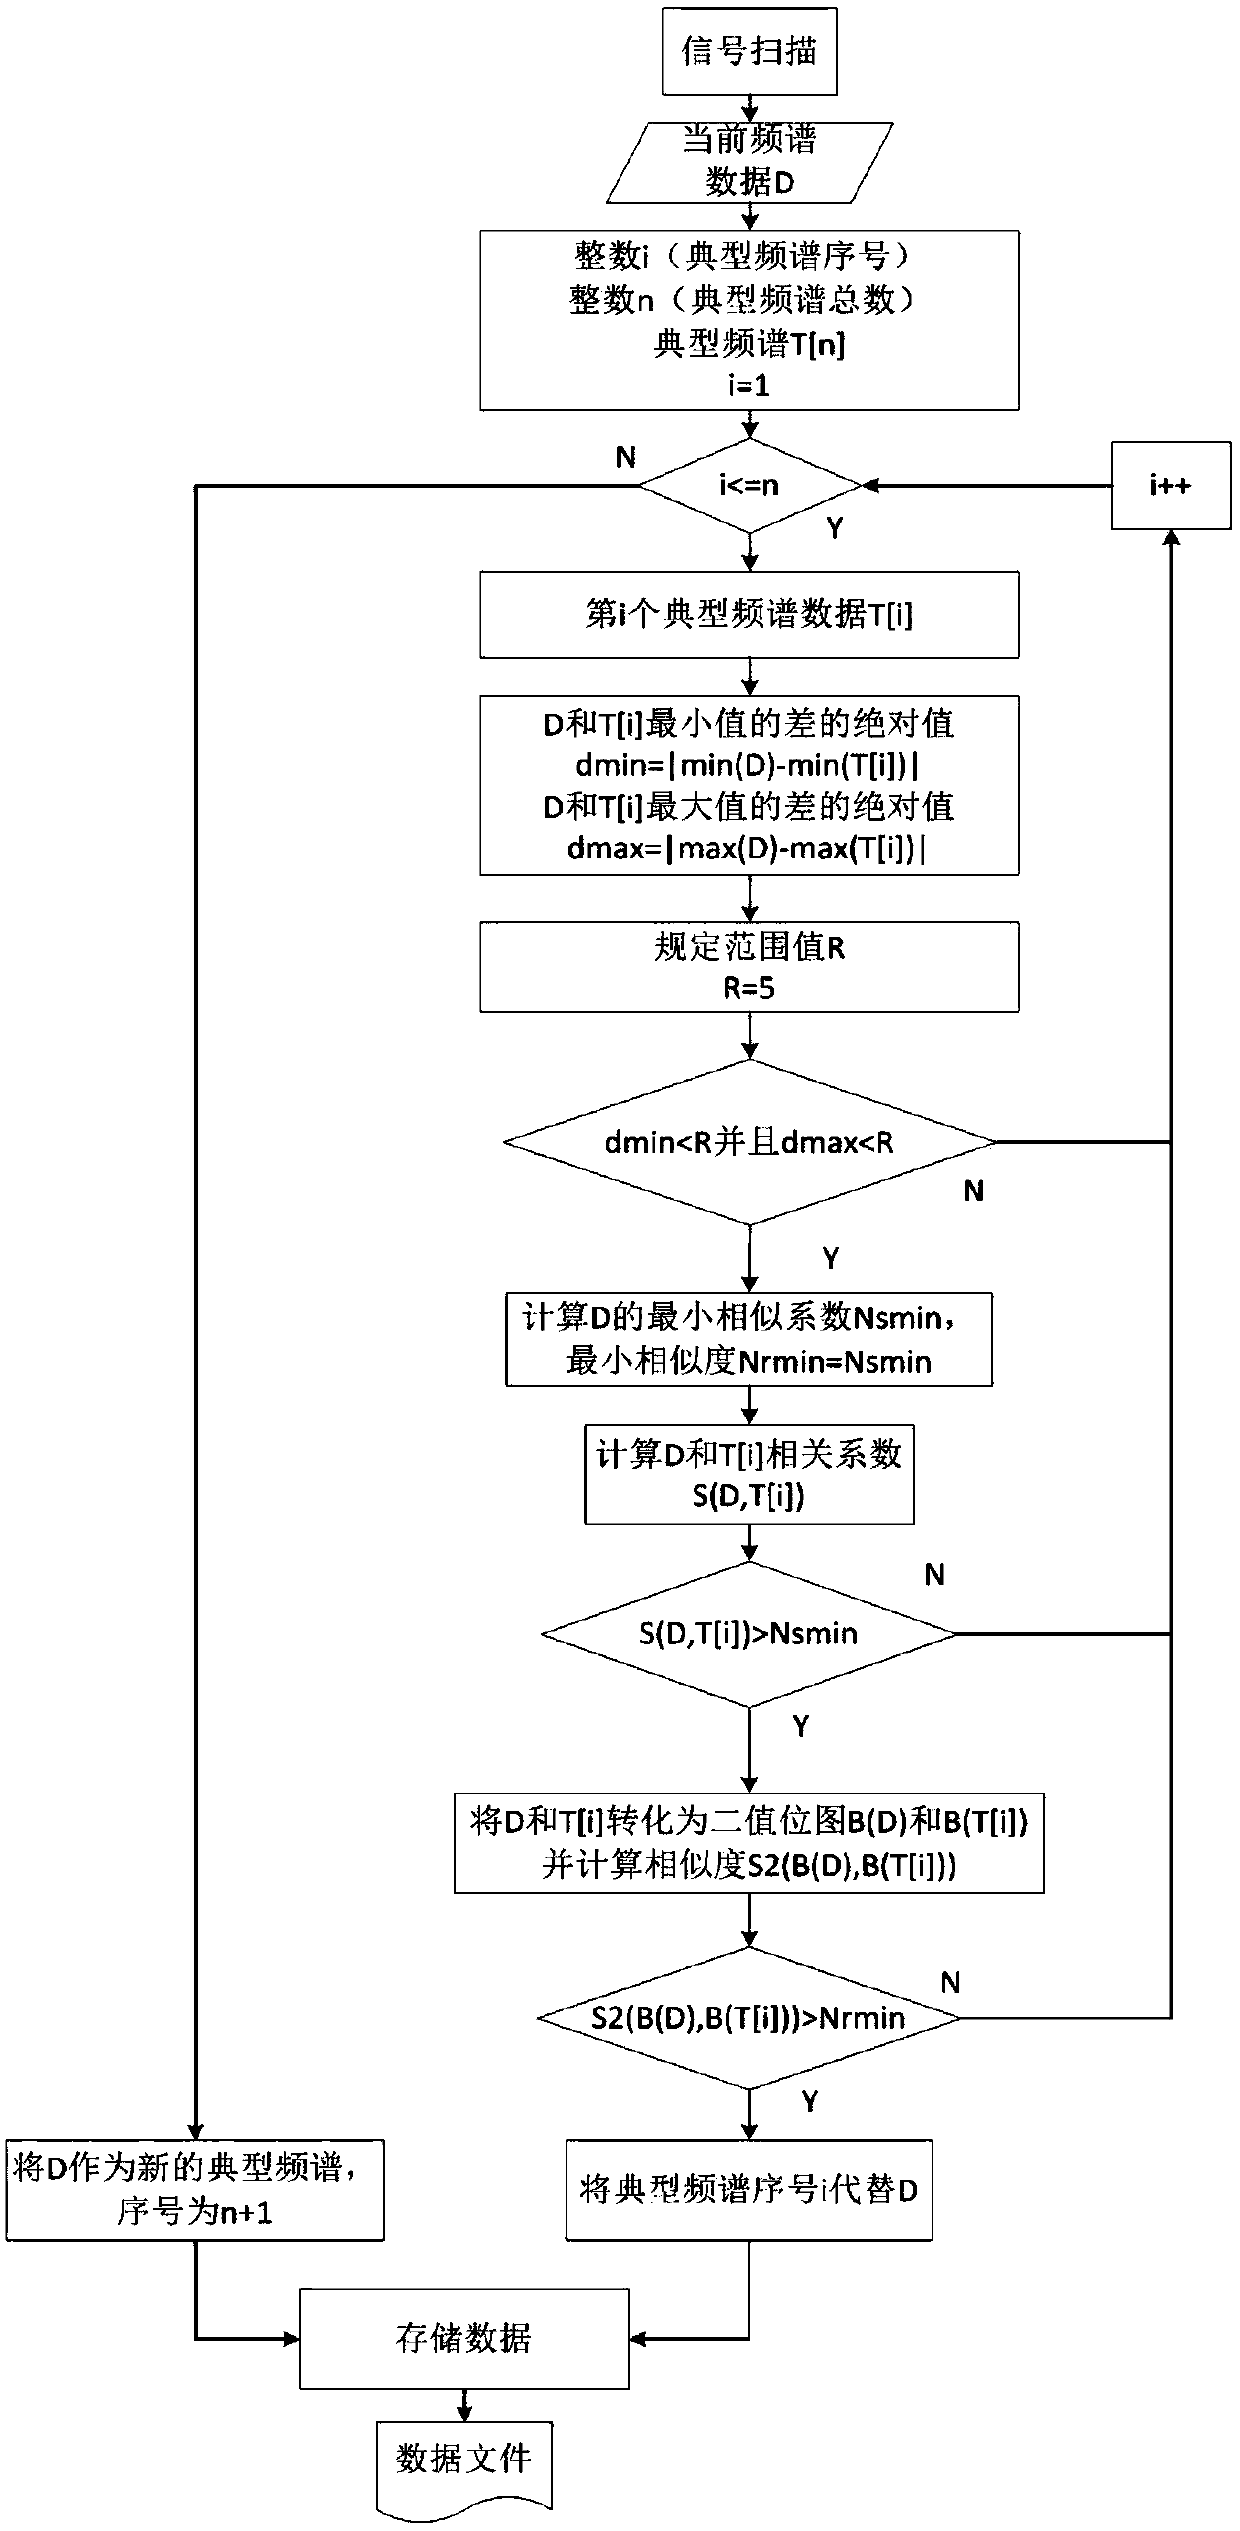 An adaptive real-time spectrum data compression method and system